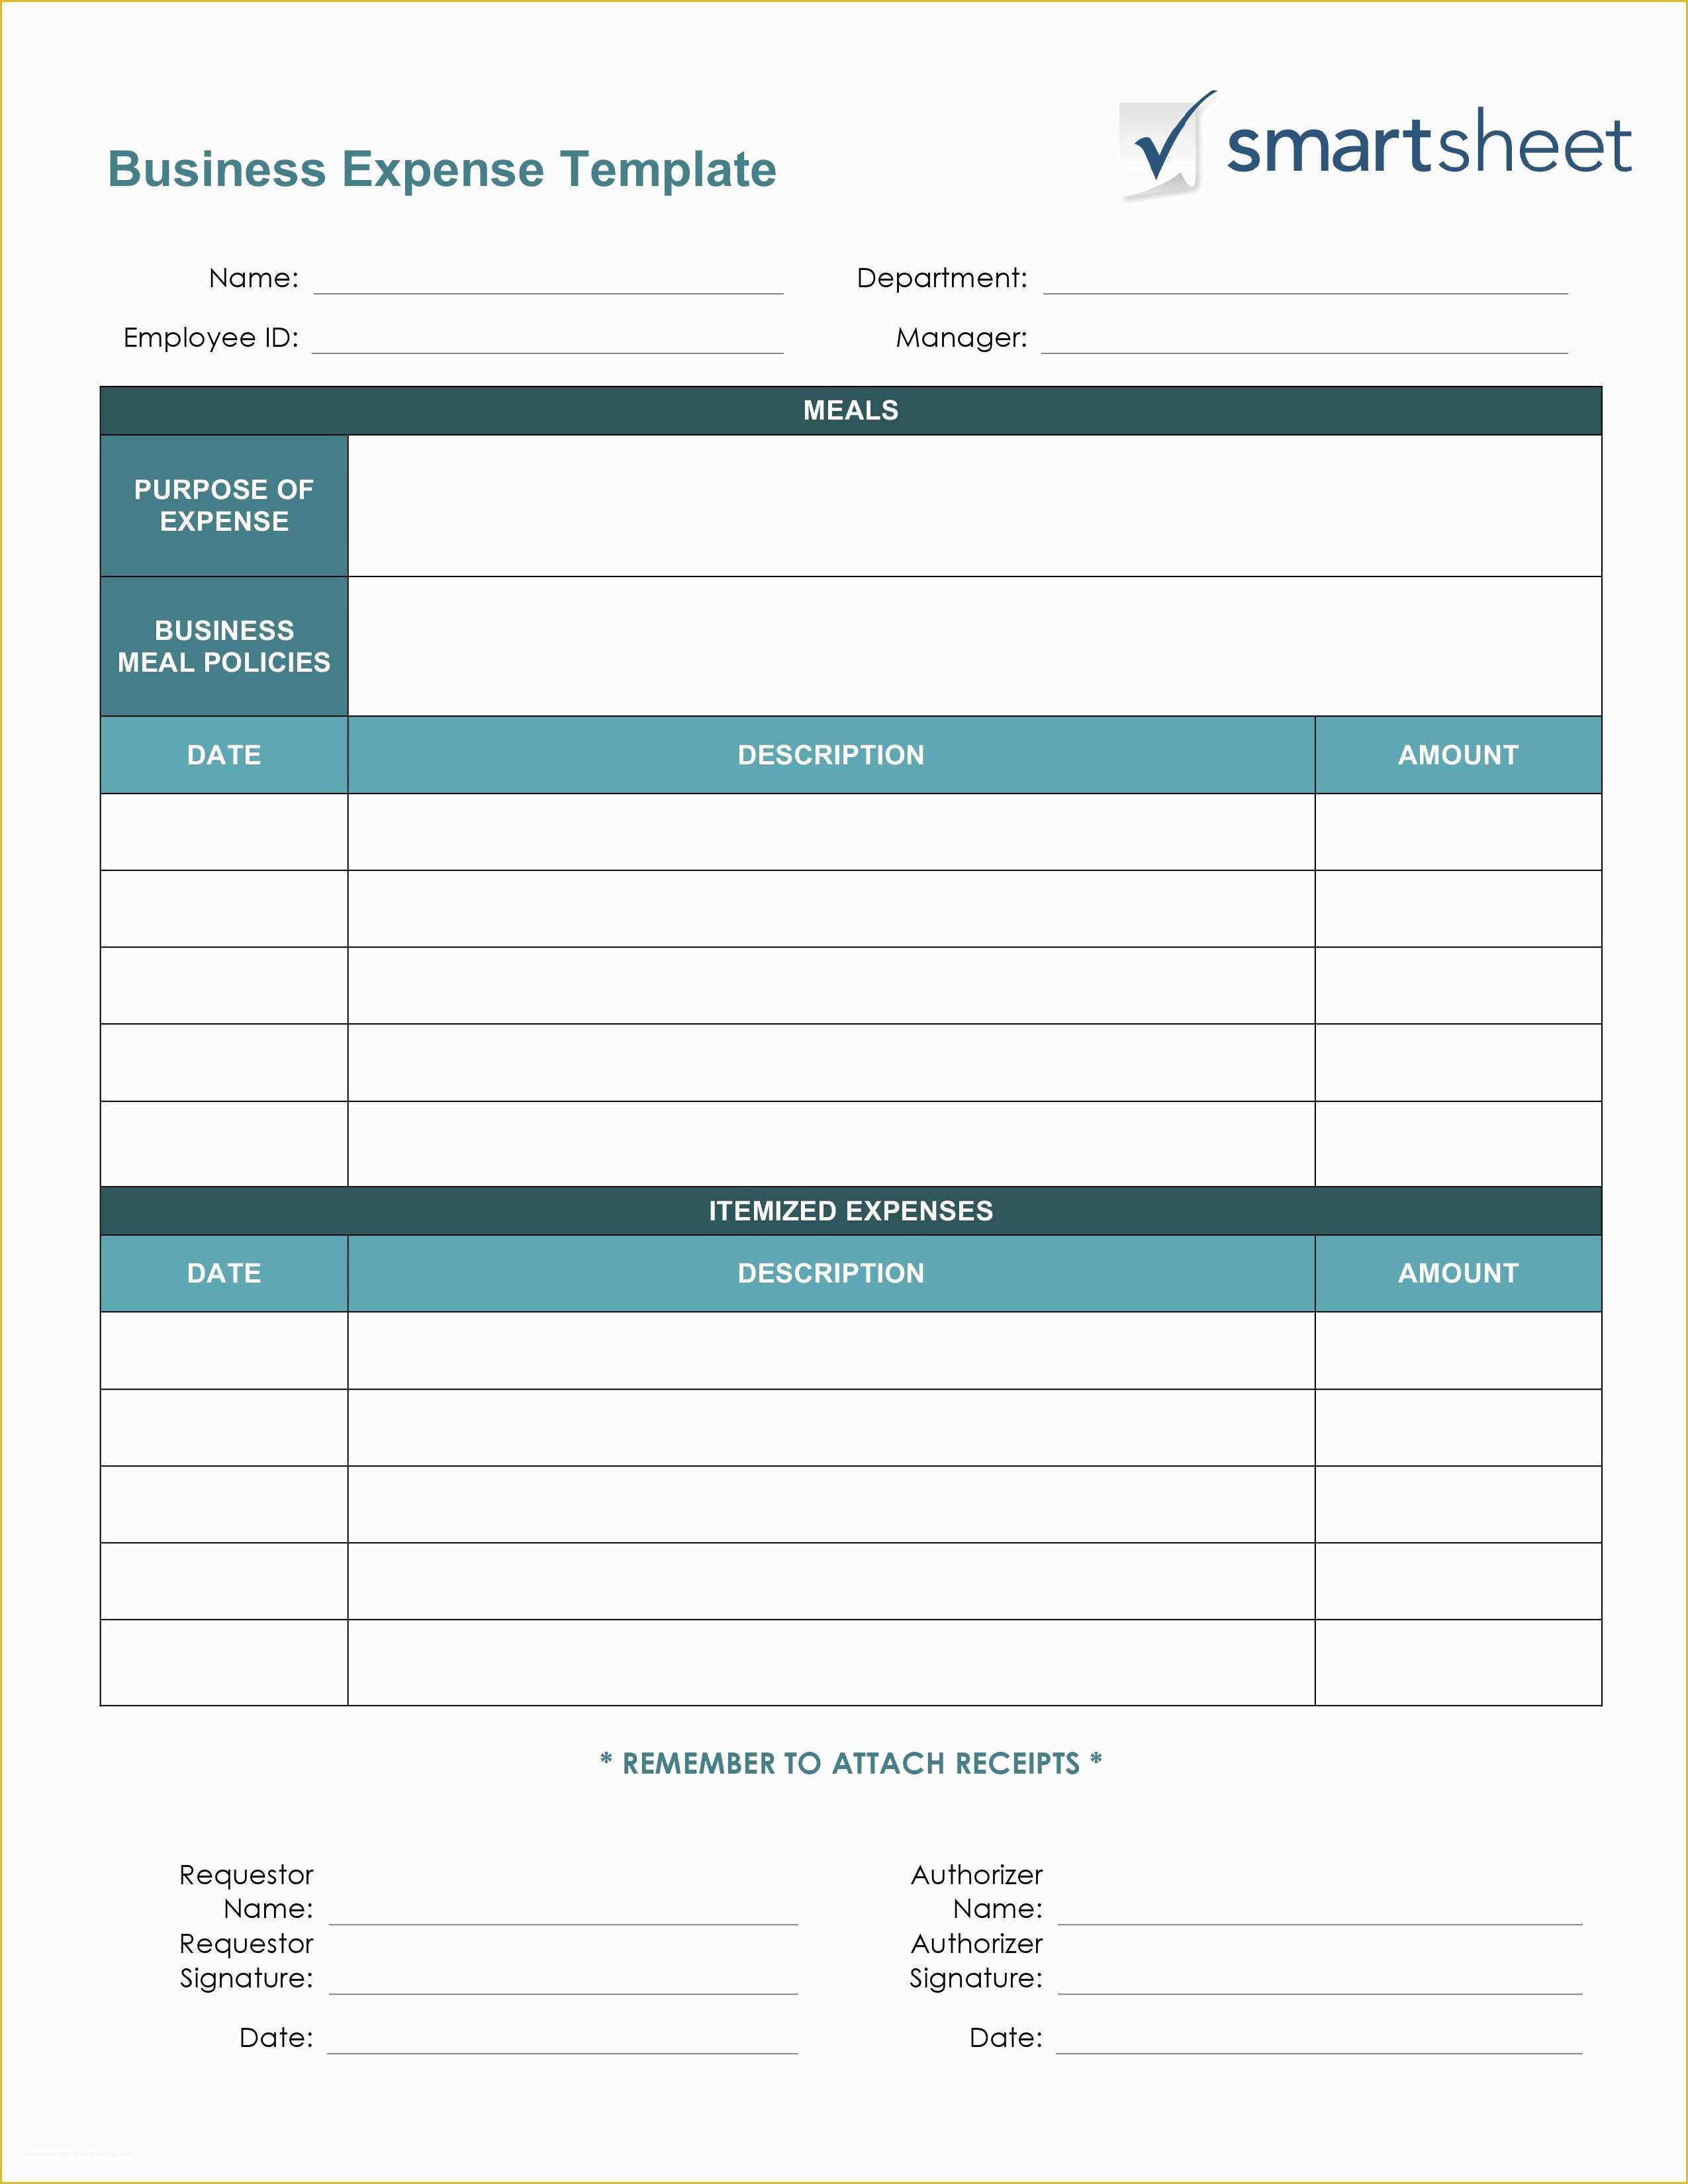 Business Expense Report Template Free Of Free Expense Report Templates Smartsheet